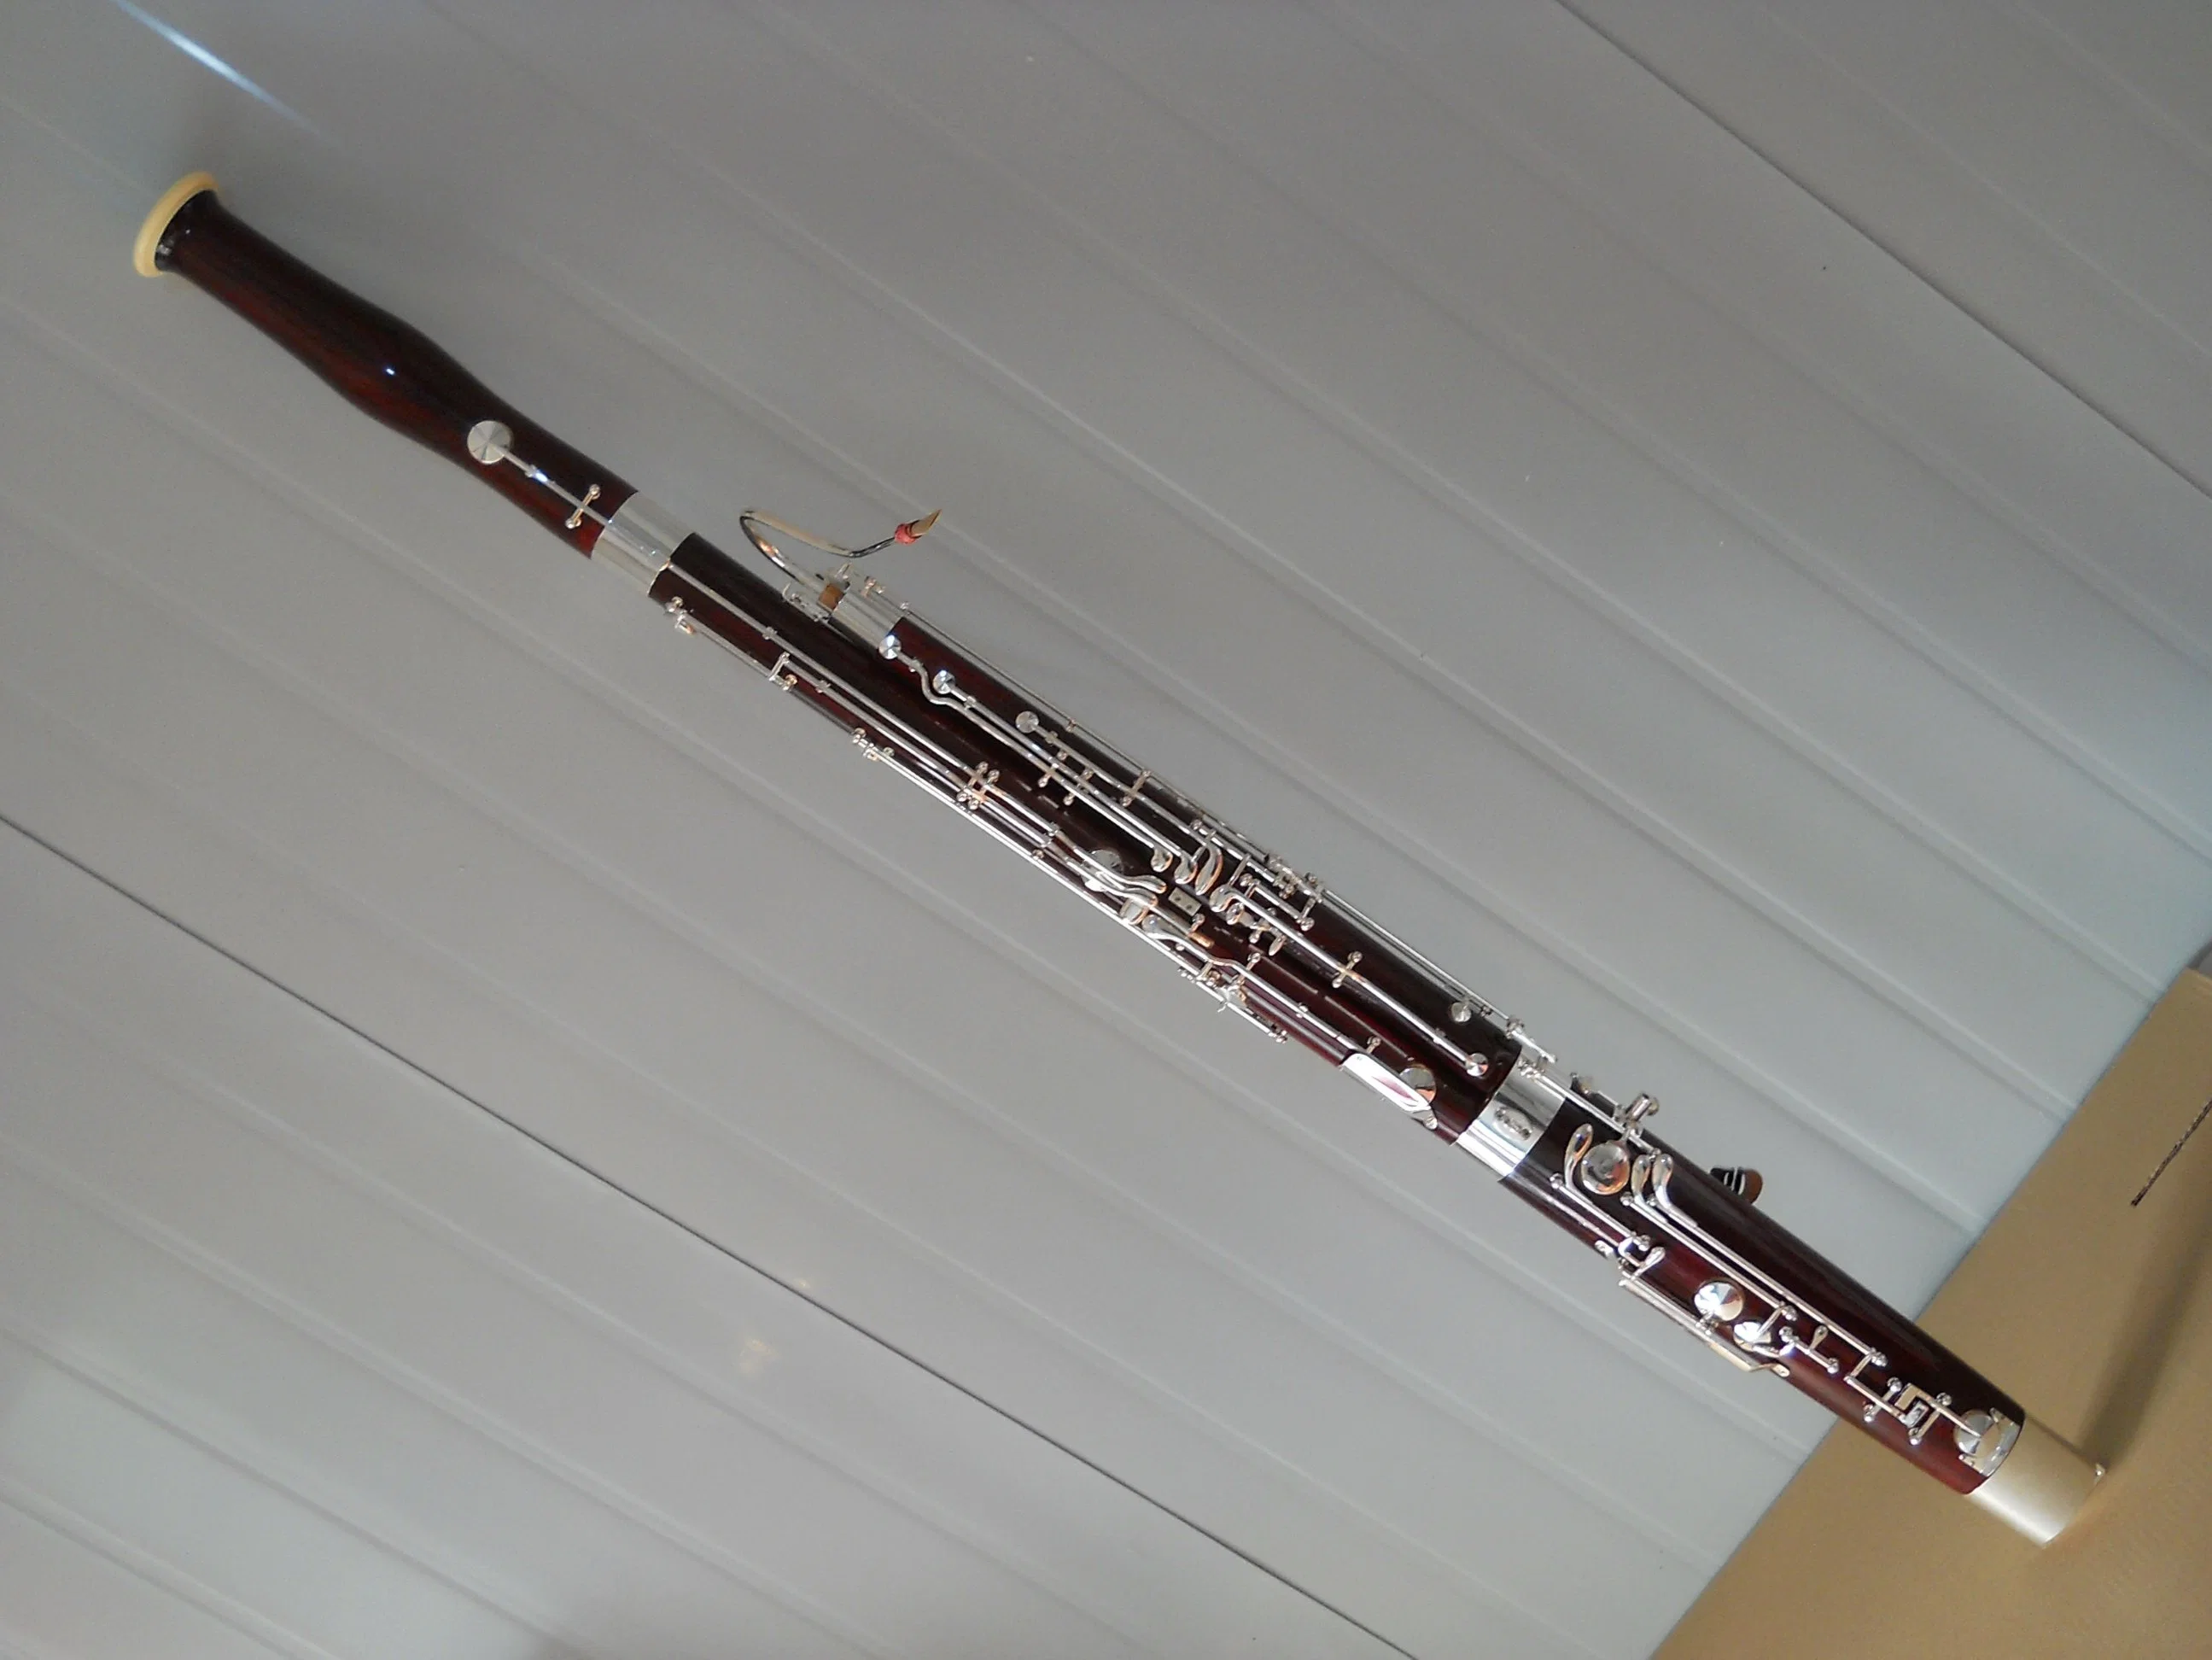 Wholesale/Supplier Bassoon Woodwind Musical Instrument. Made in China